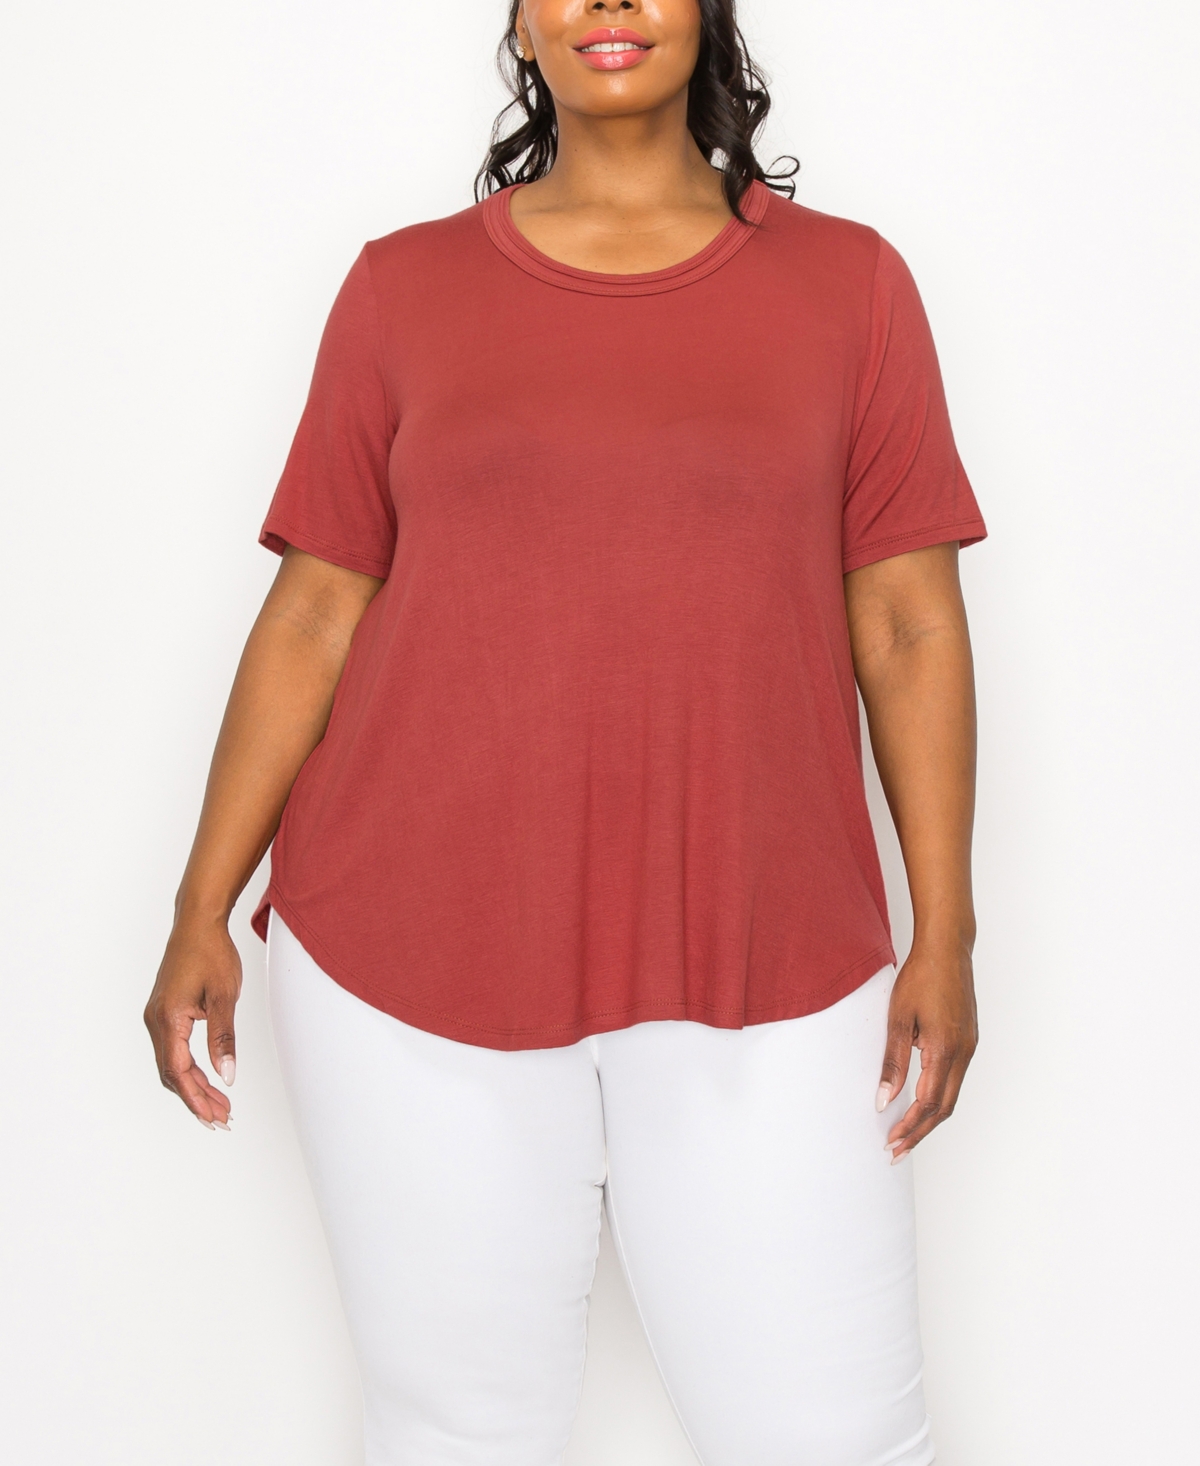 Coin 1804 Plus Size Double Binding Swing T-shirt In Brick Pale